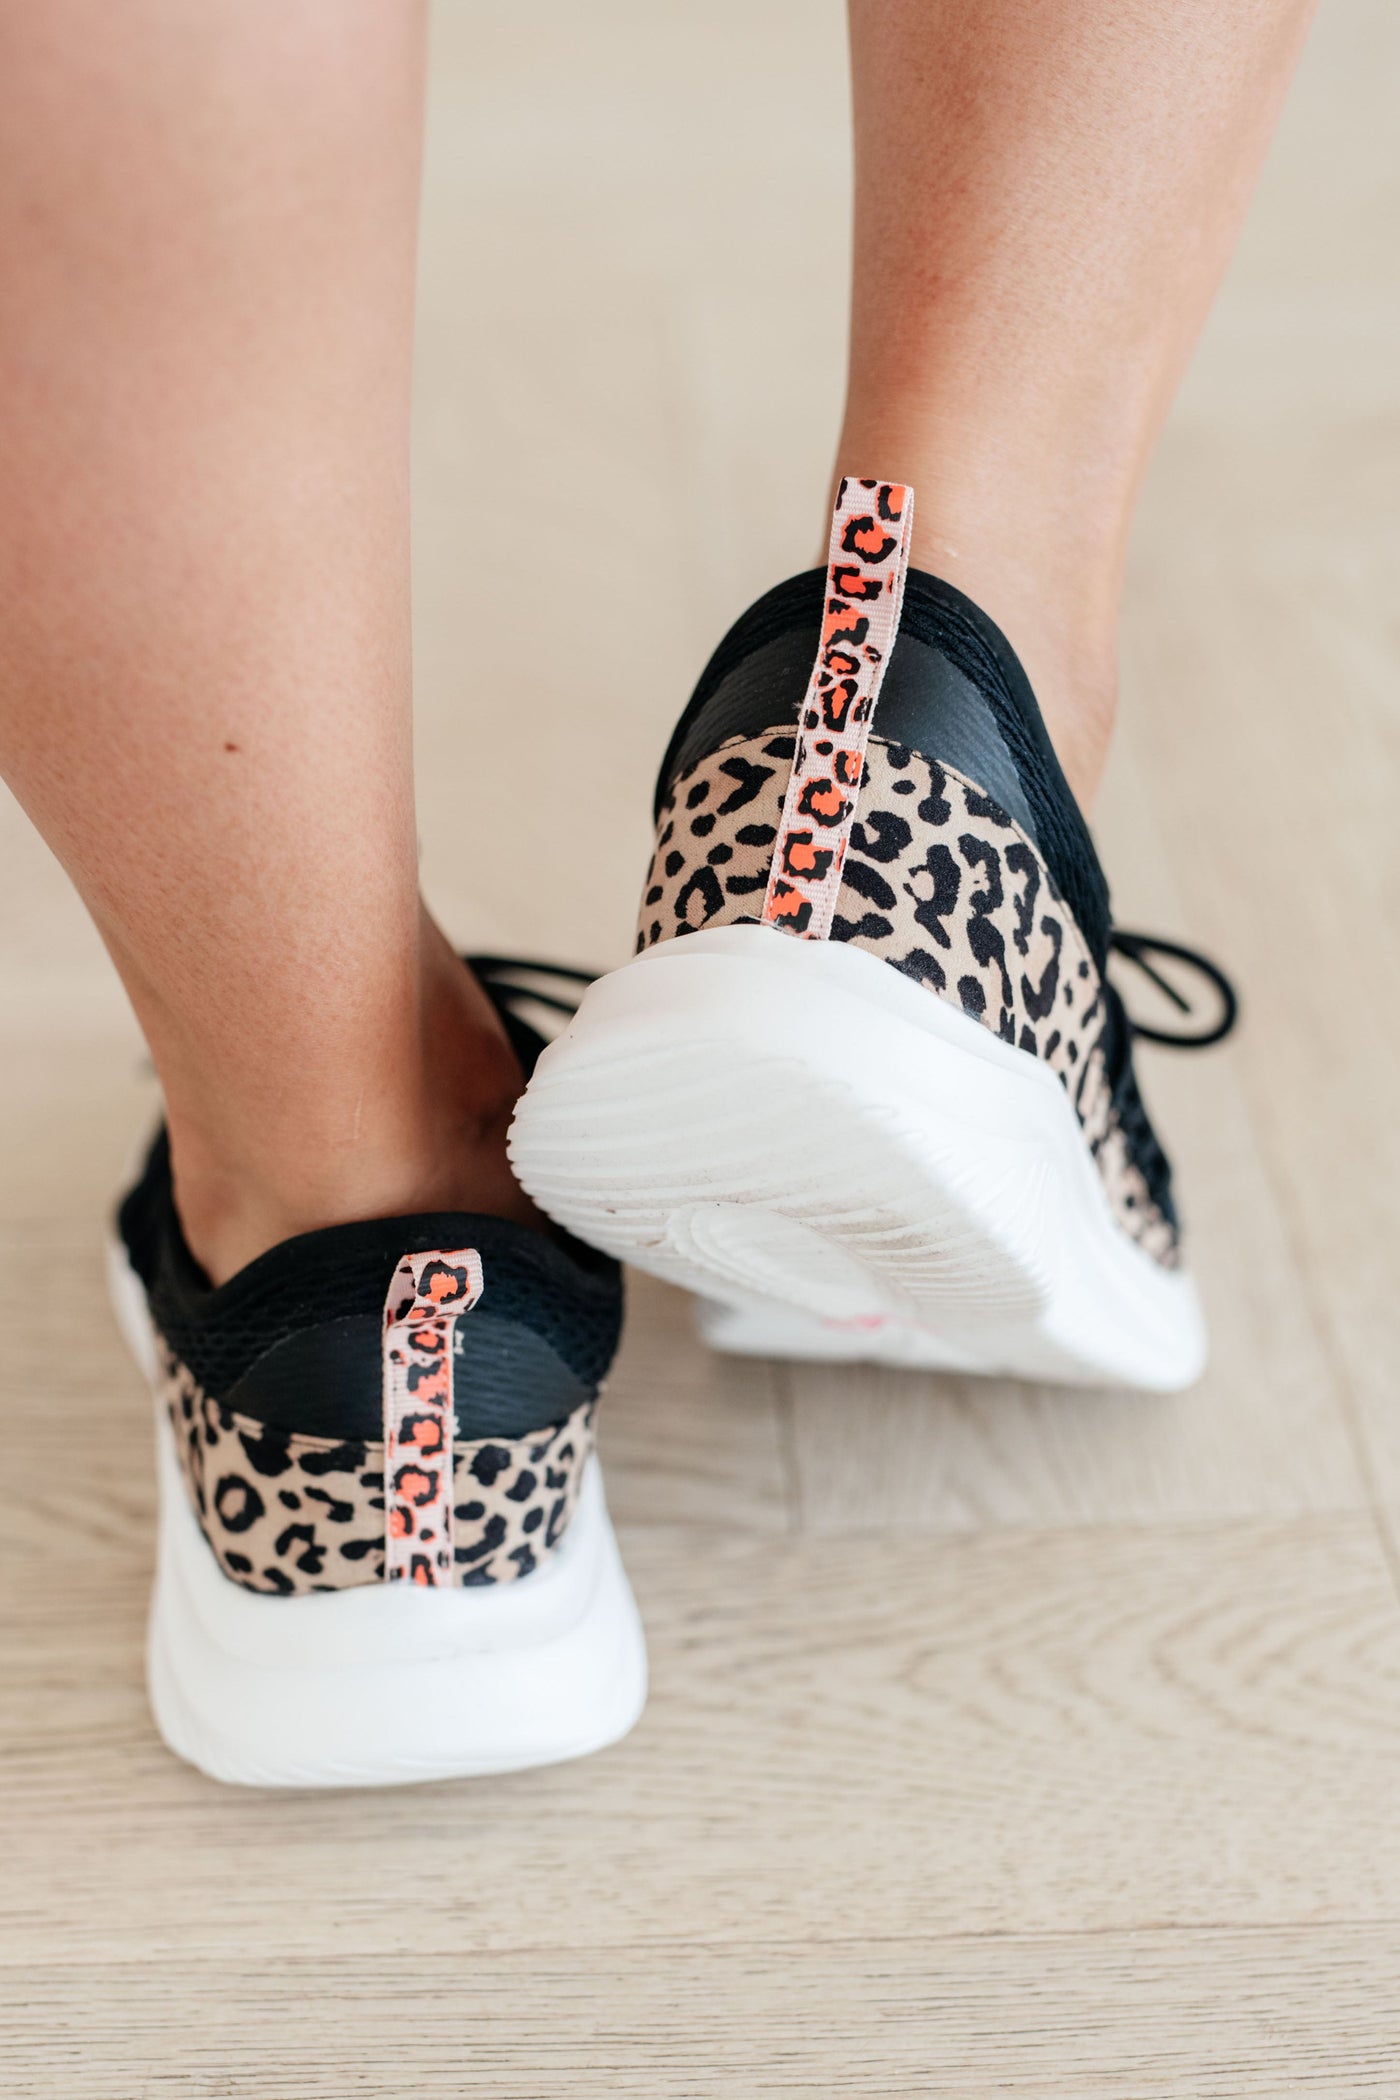 Step into style and comfort with Easy to Spot Sneakers! Featuring a soft memory foam sole and a fierce leopard accent, these kicks will have you strutting with confidence